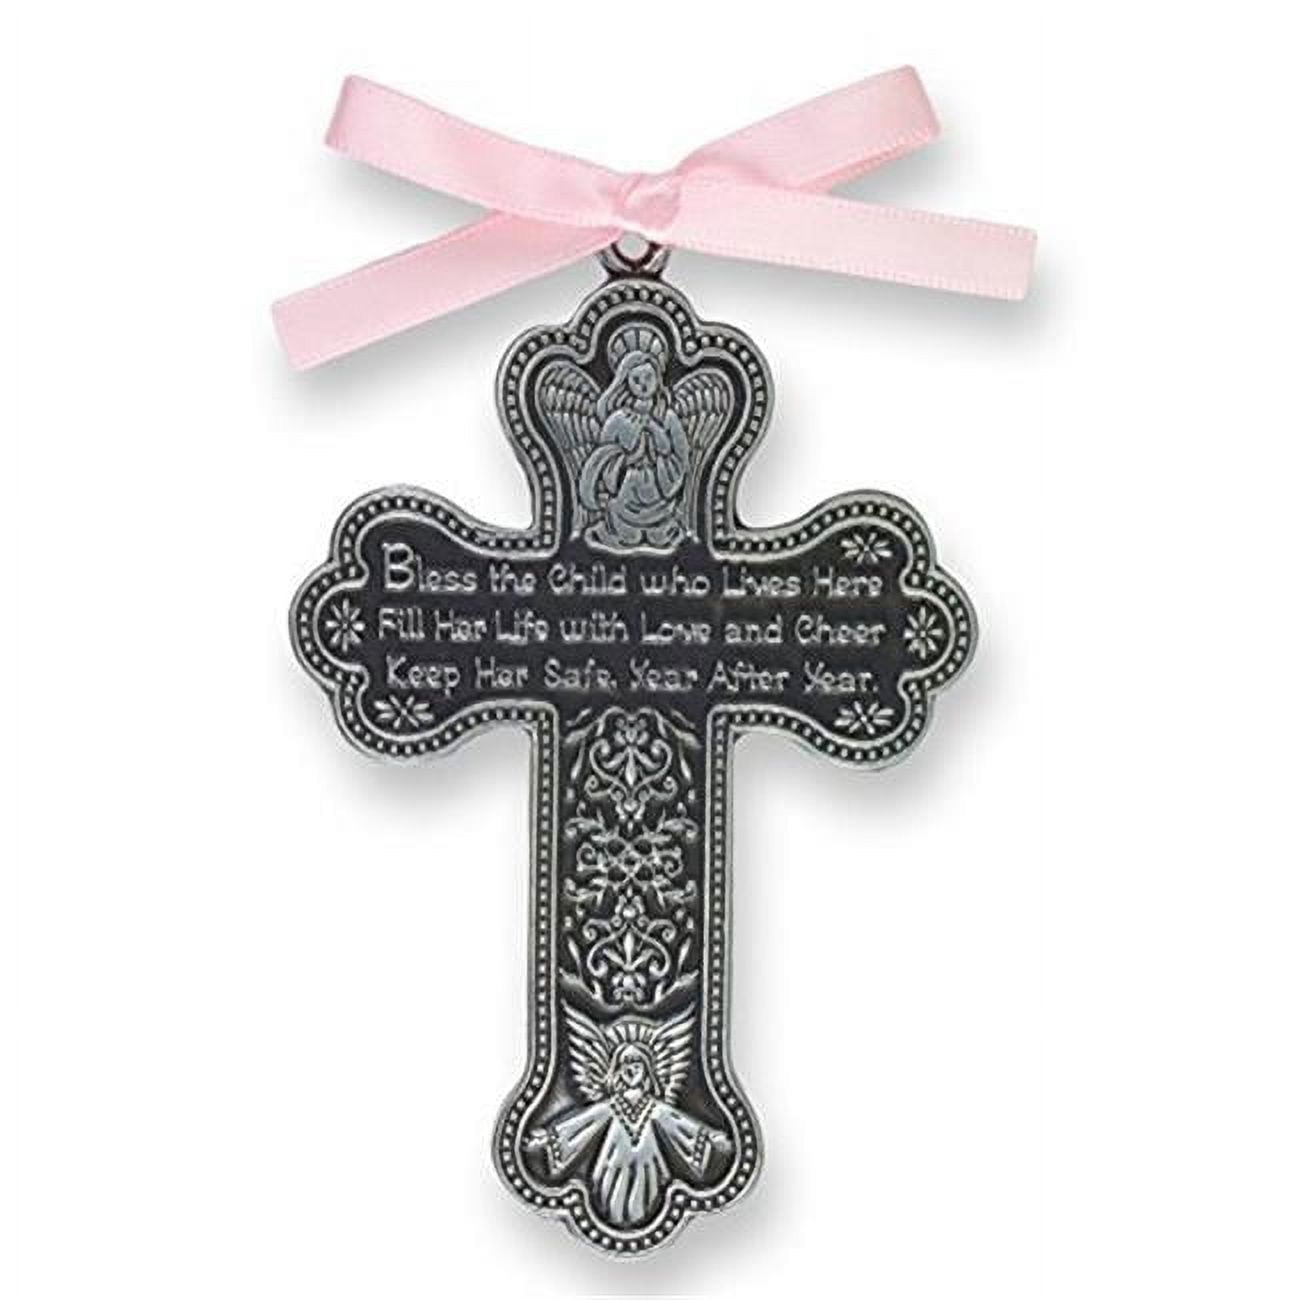 Ca Gift 14175x Crib Cross-bless This Child With Pink Ribbon - Pewter